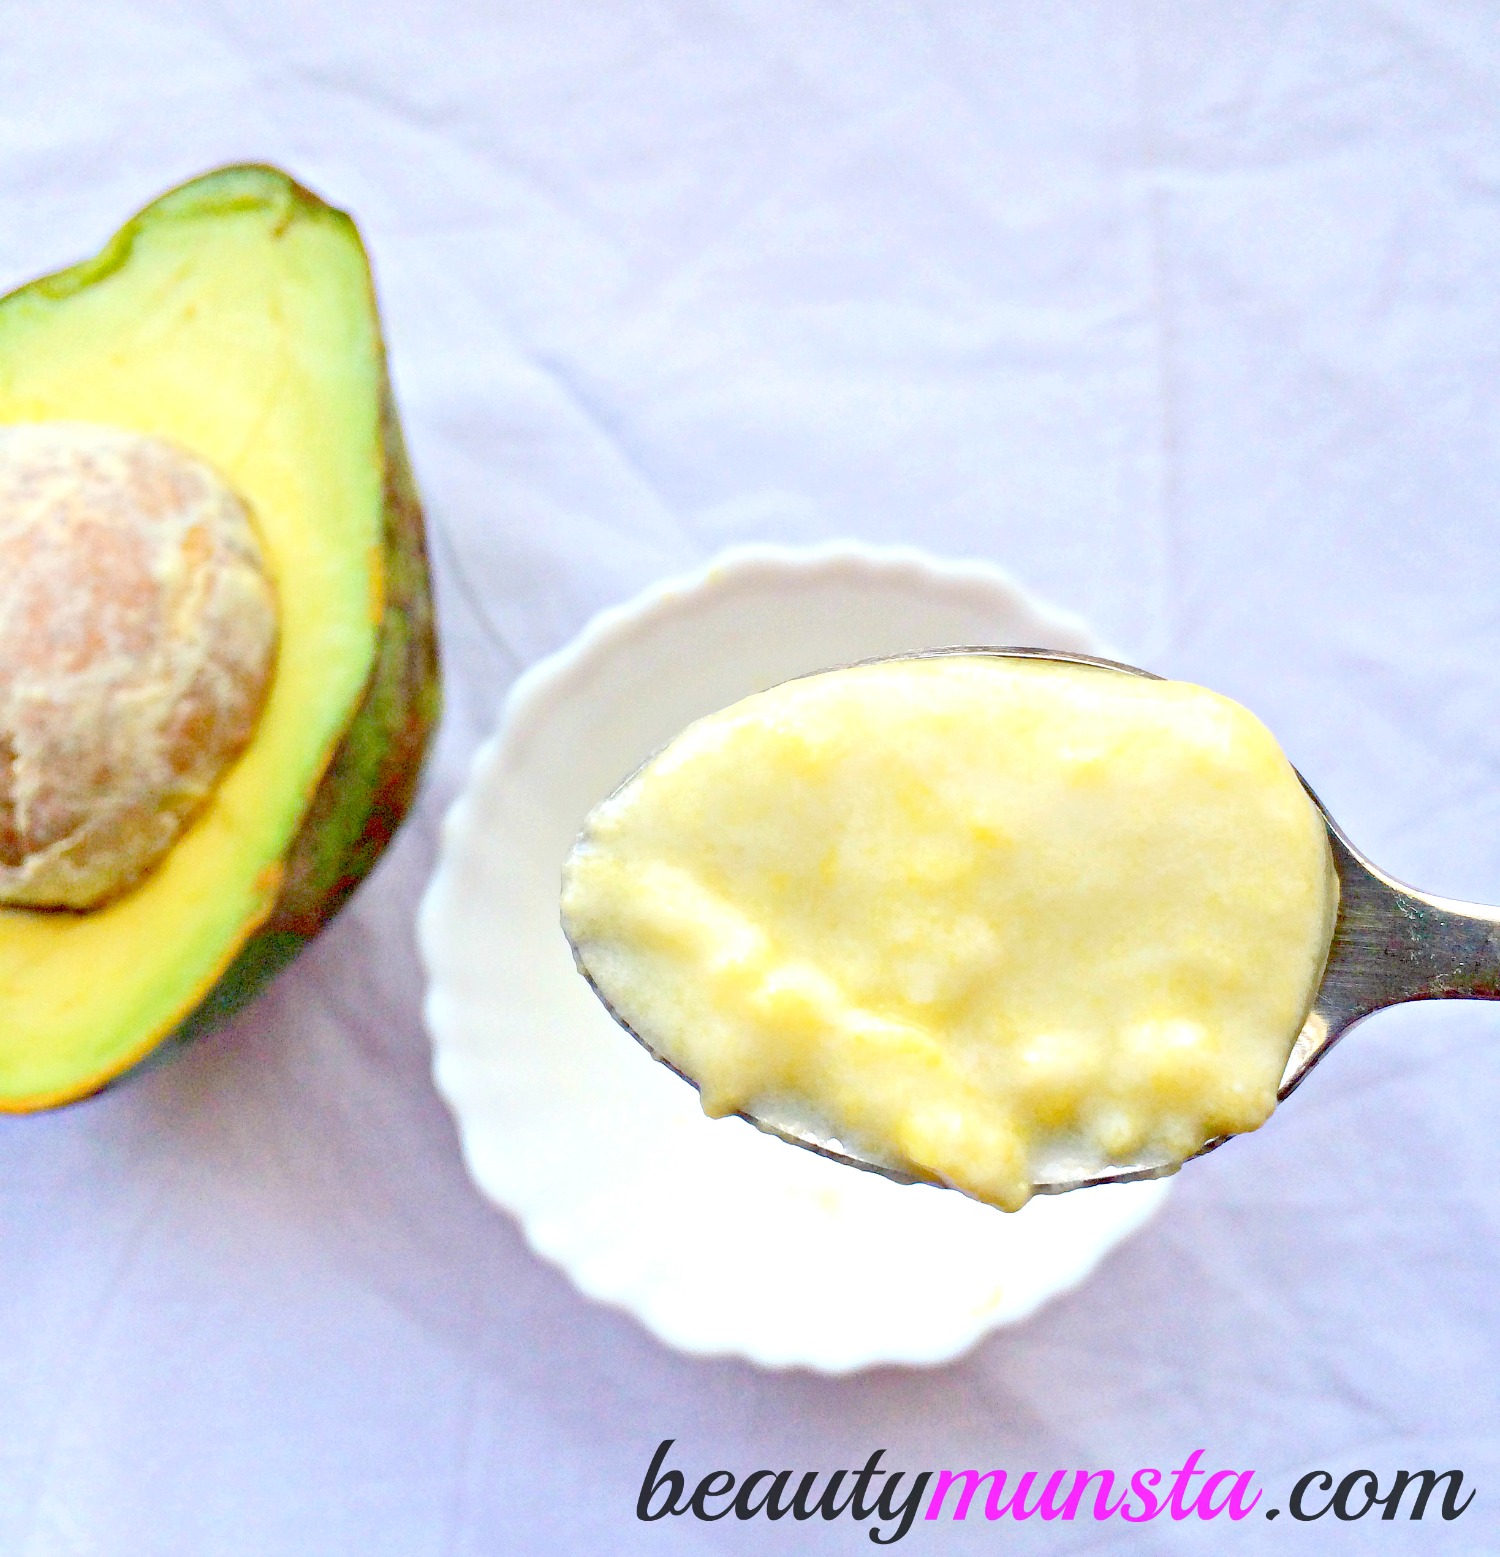 This is how your avocado and yogurt face mask should look like. Don't worry if it has a few lumps, just try your best in getting it to a smooth consistency.